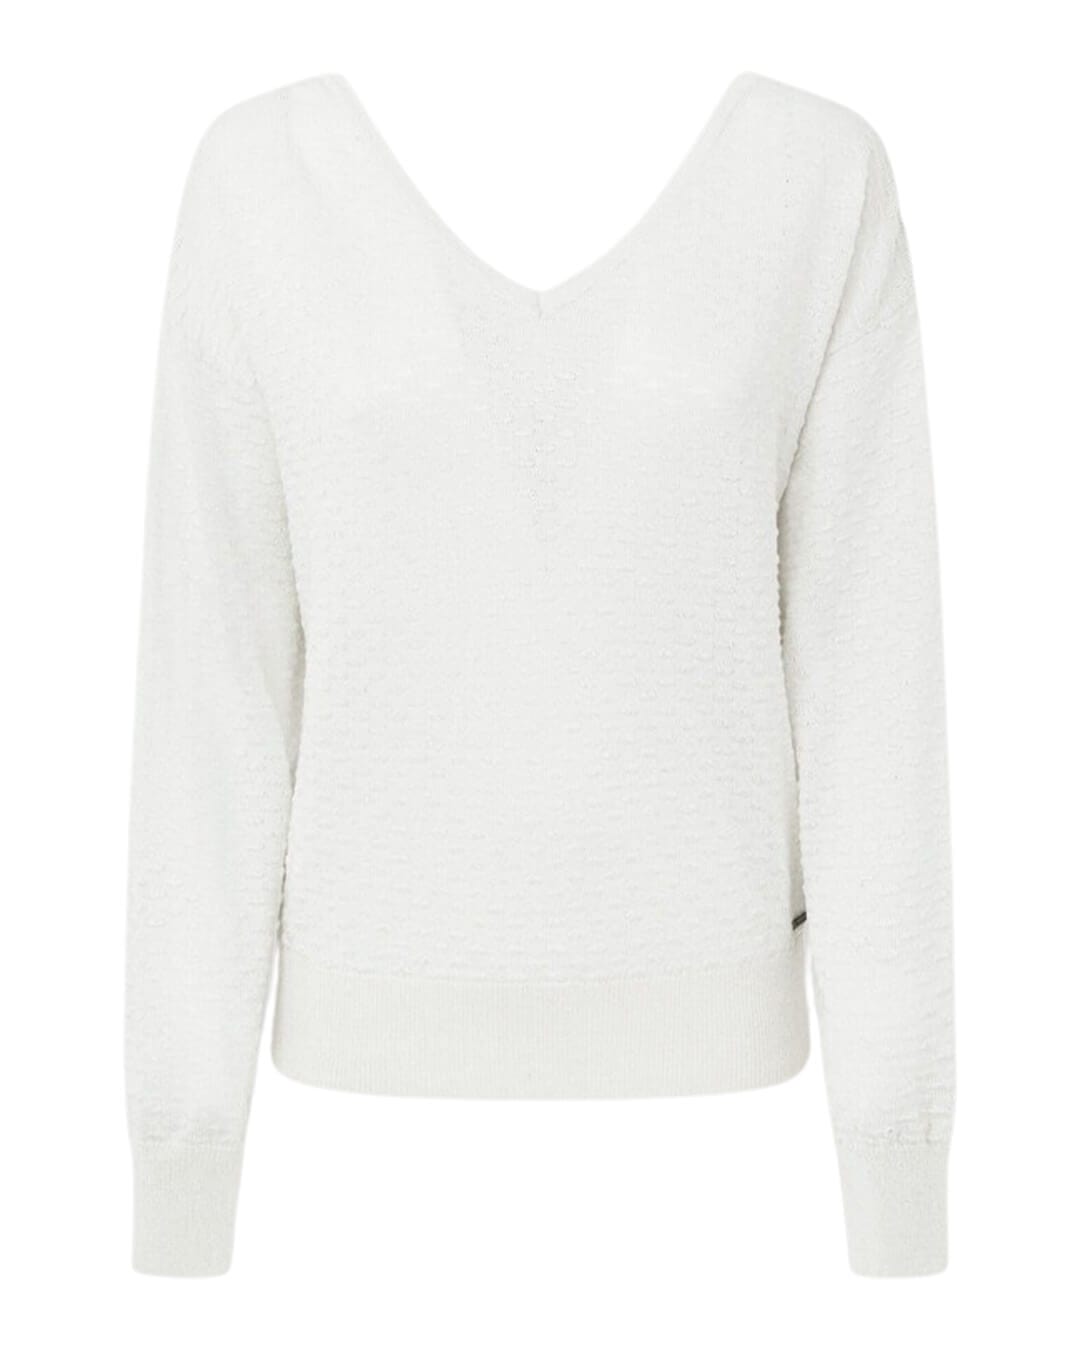 Pepe Jeans Jumpers Pepe Jeans Dani White Jumper